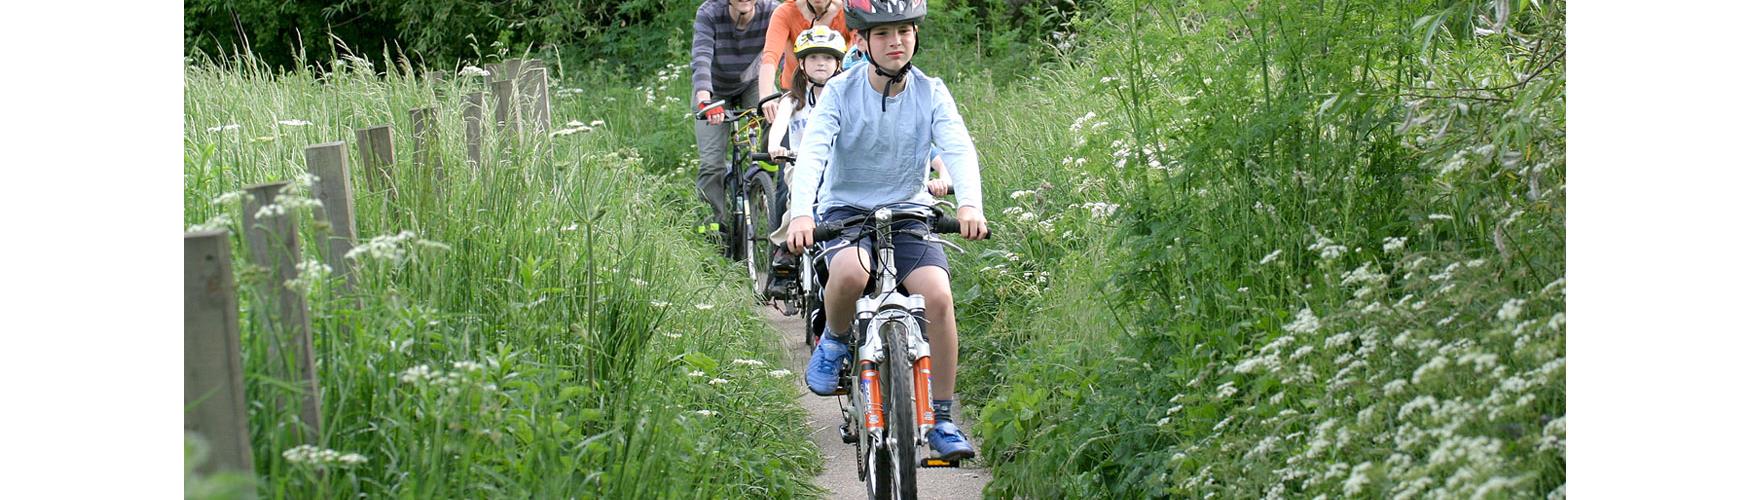 Family cycling in the Cotswolds